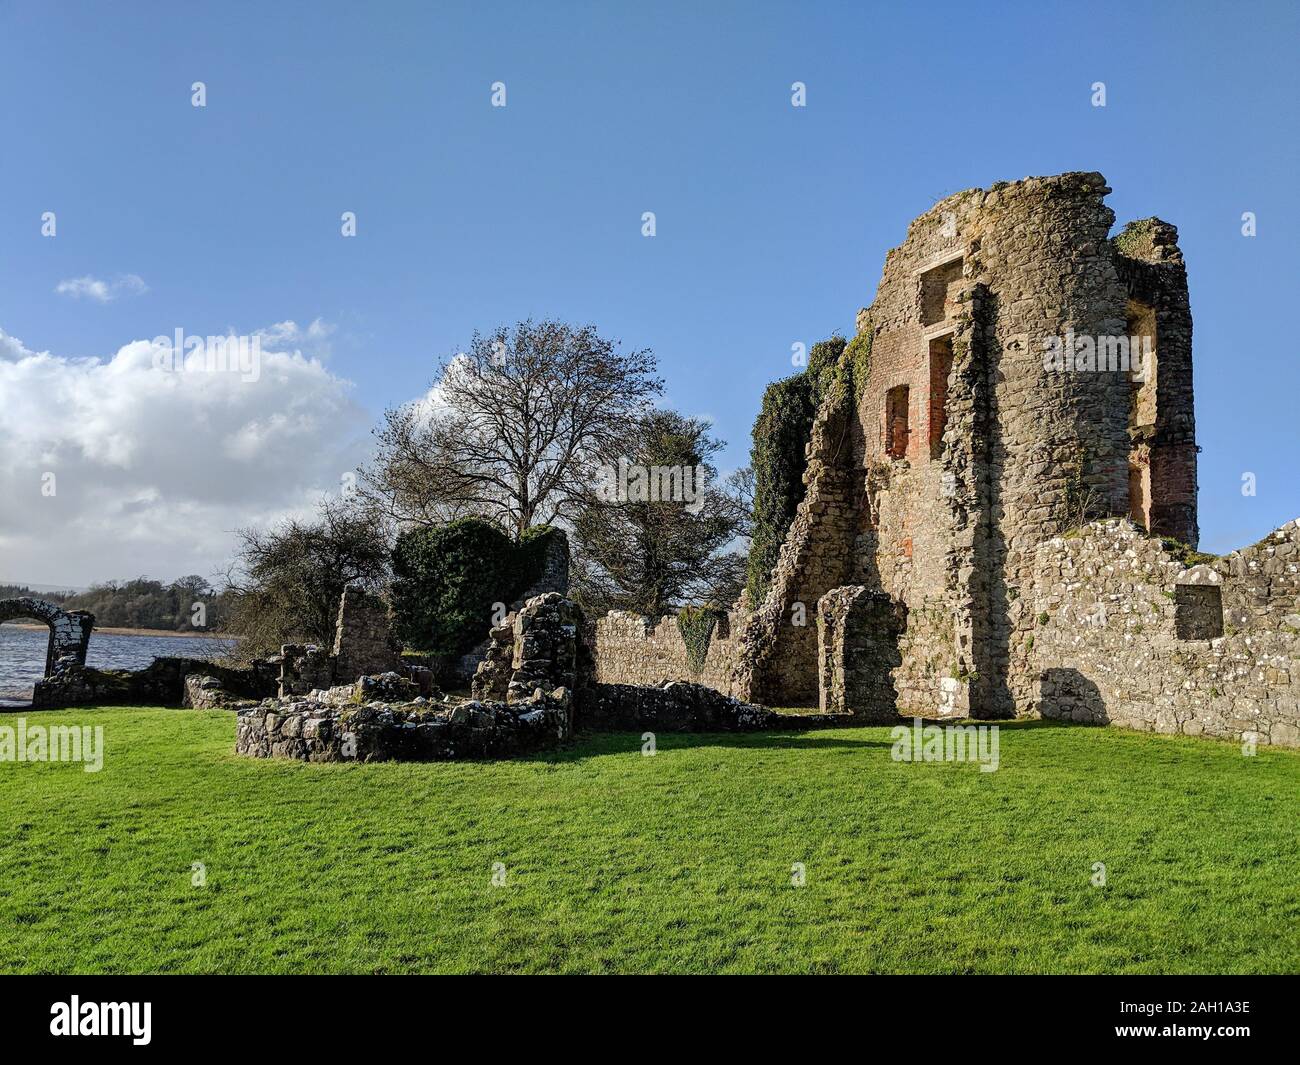 An old ruined castle in northern ireland Stock Photo